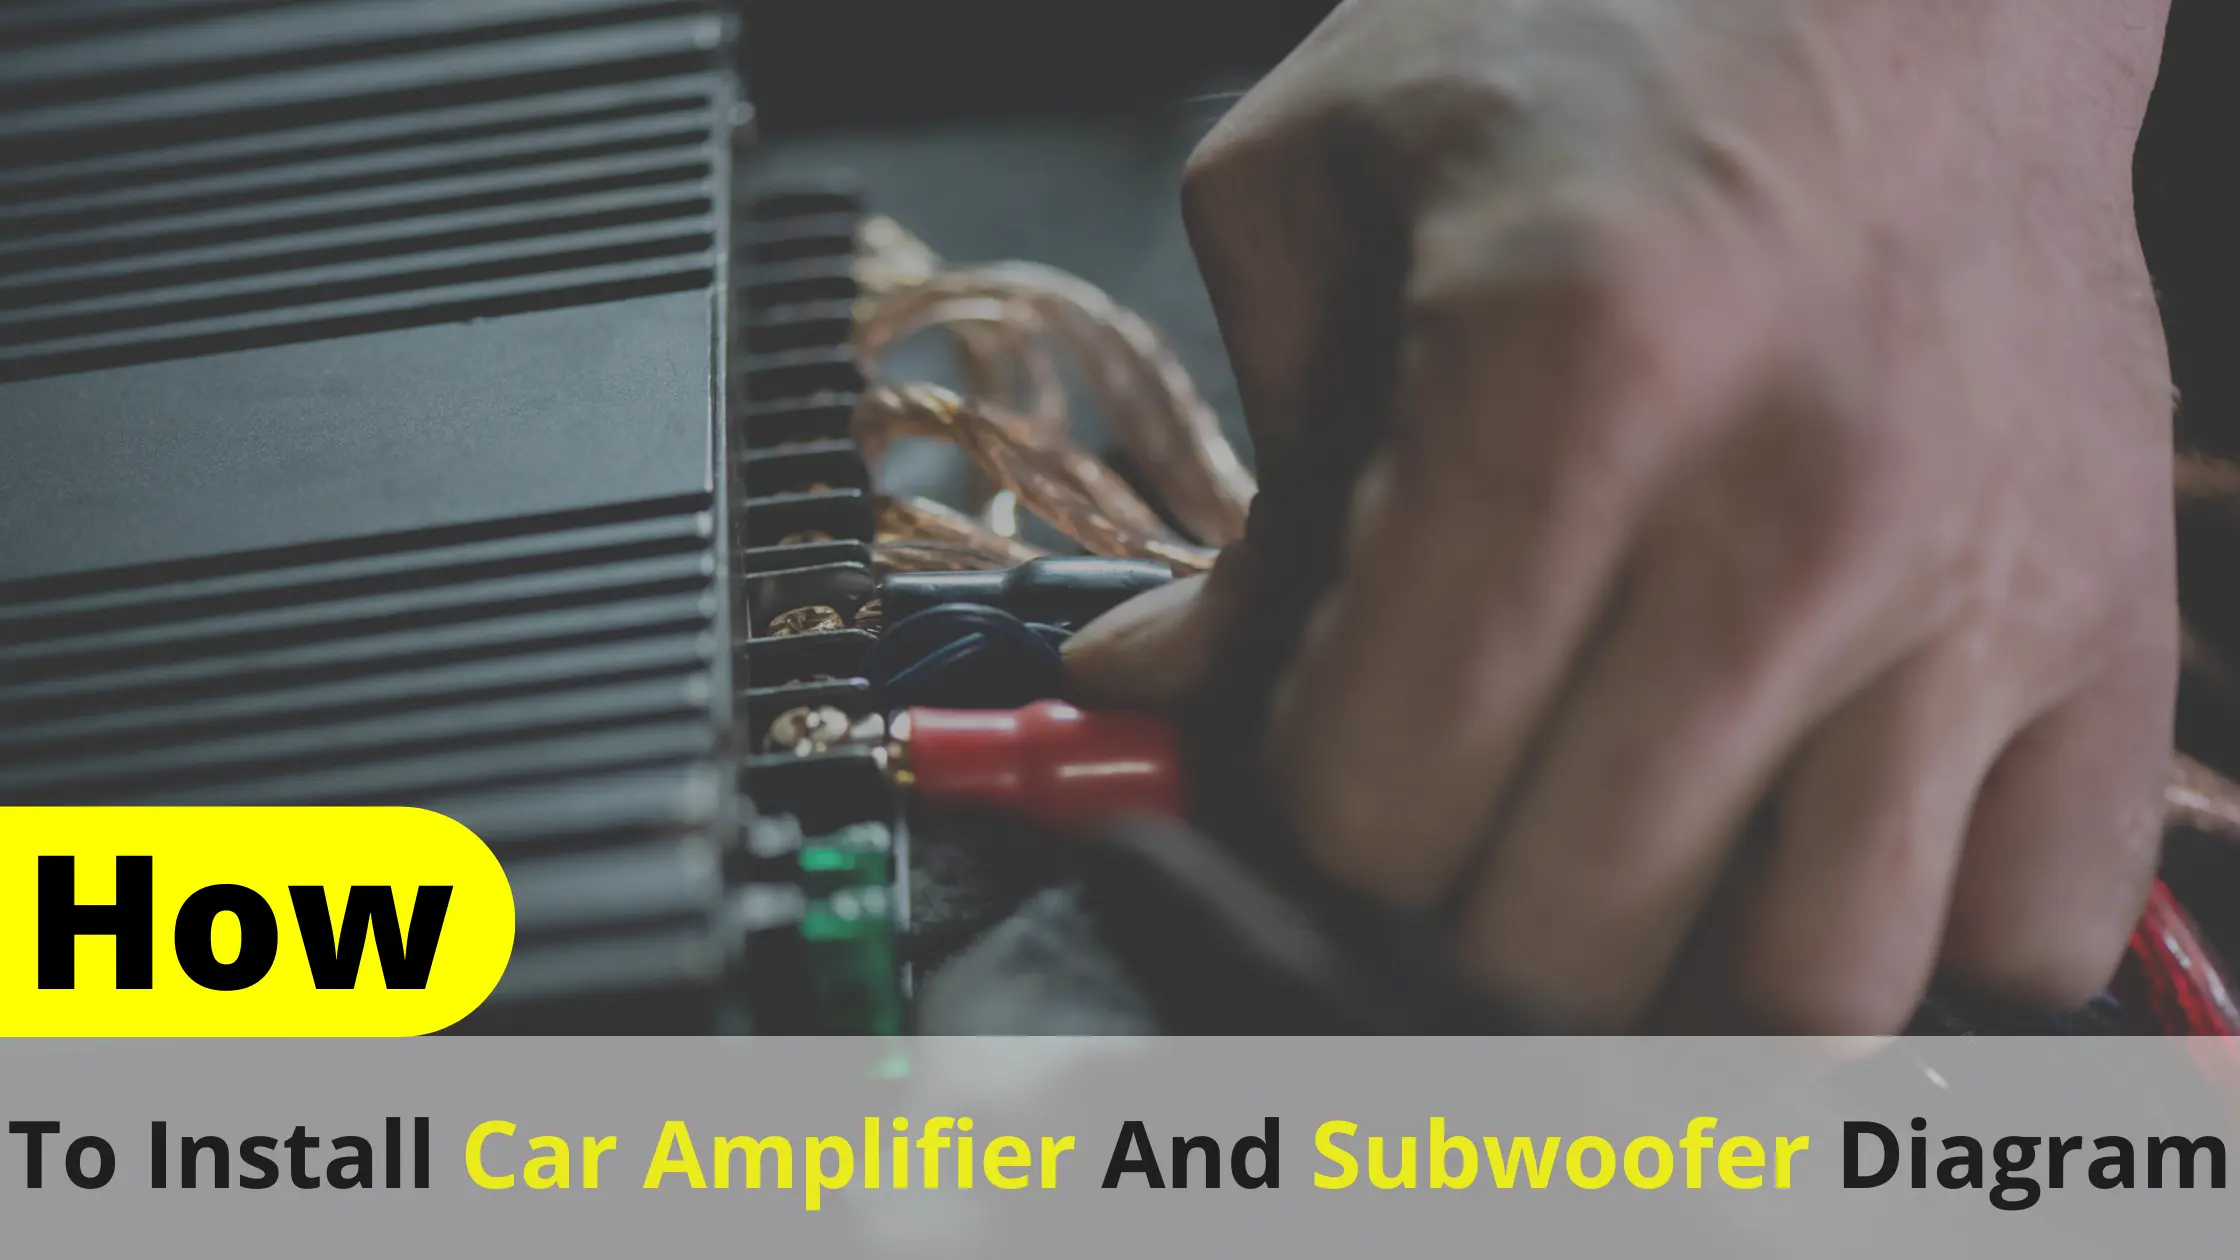 Step by Step Guide to Installing Car Amplifier and Subwoofer Diagram